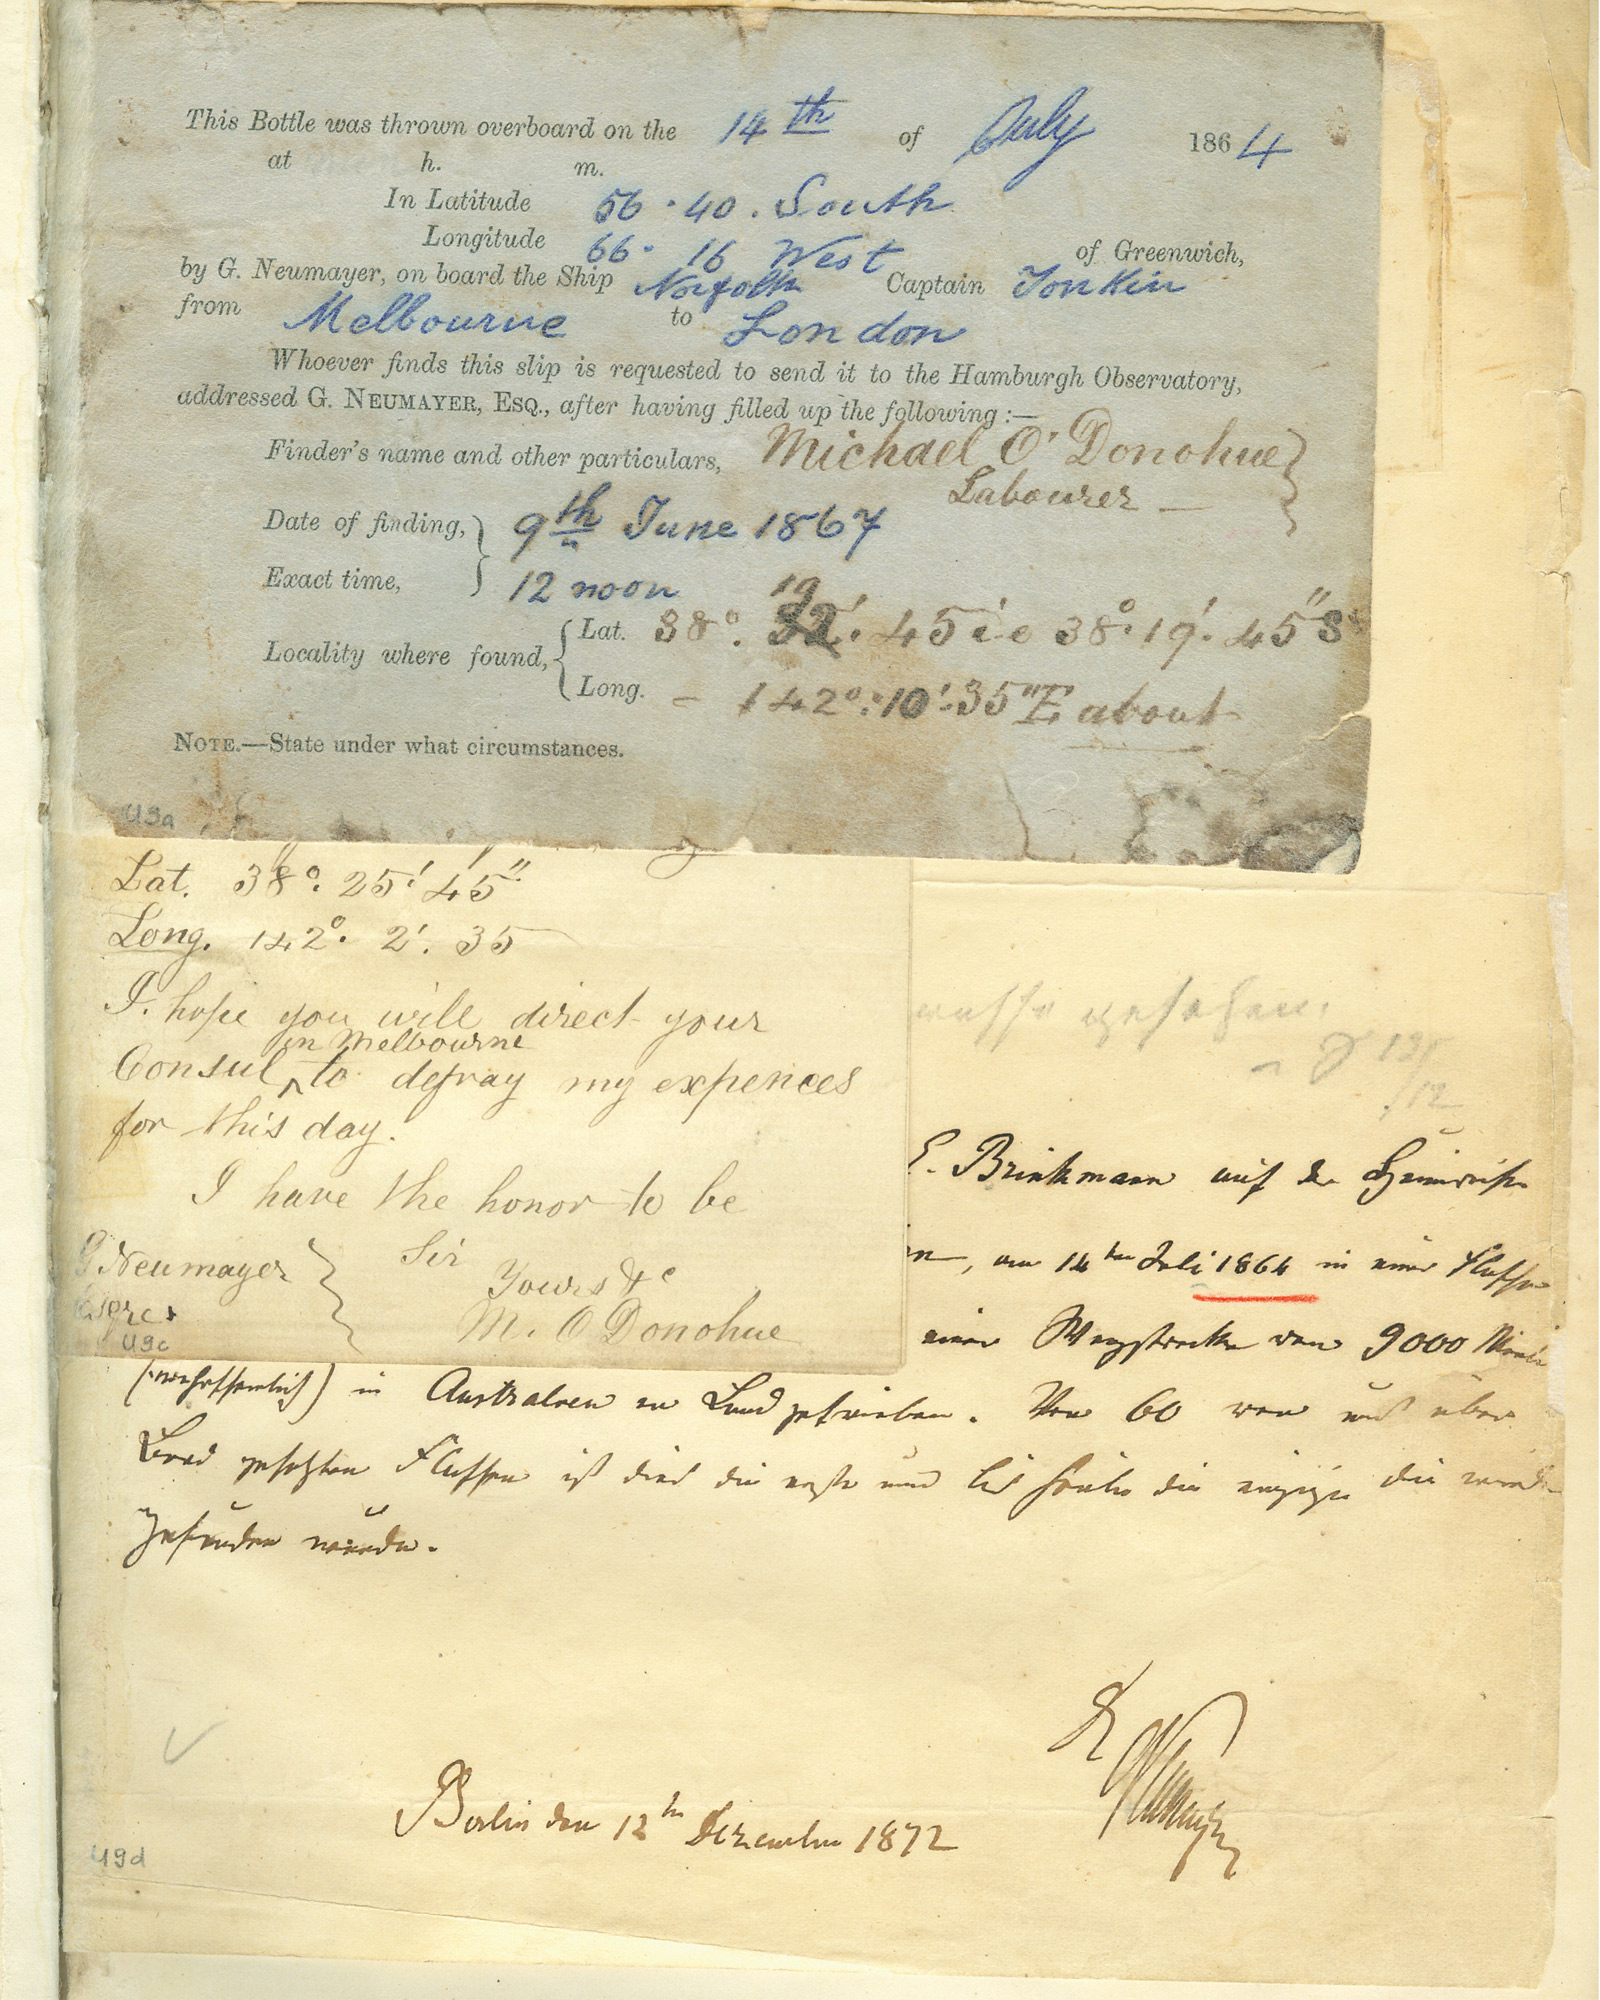 An image of worn documents, thrown overboard in a bottle in eighteen sixty four and discovered off a coast in eighteen sixty seven.